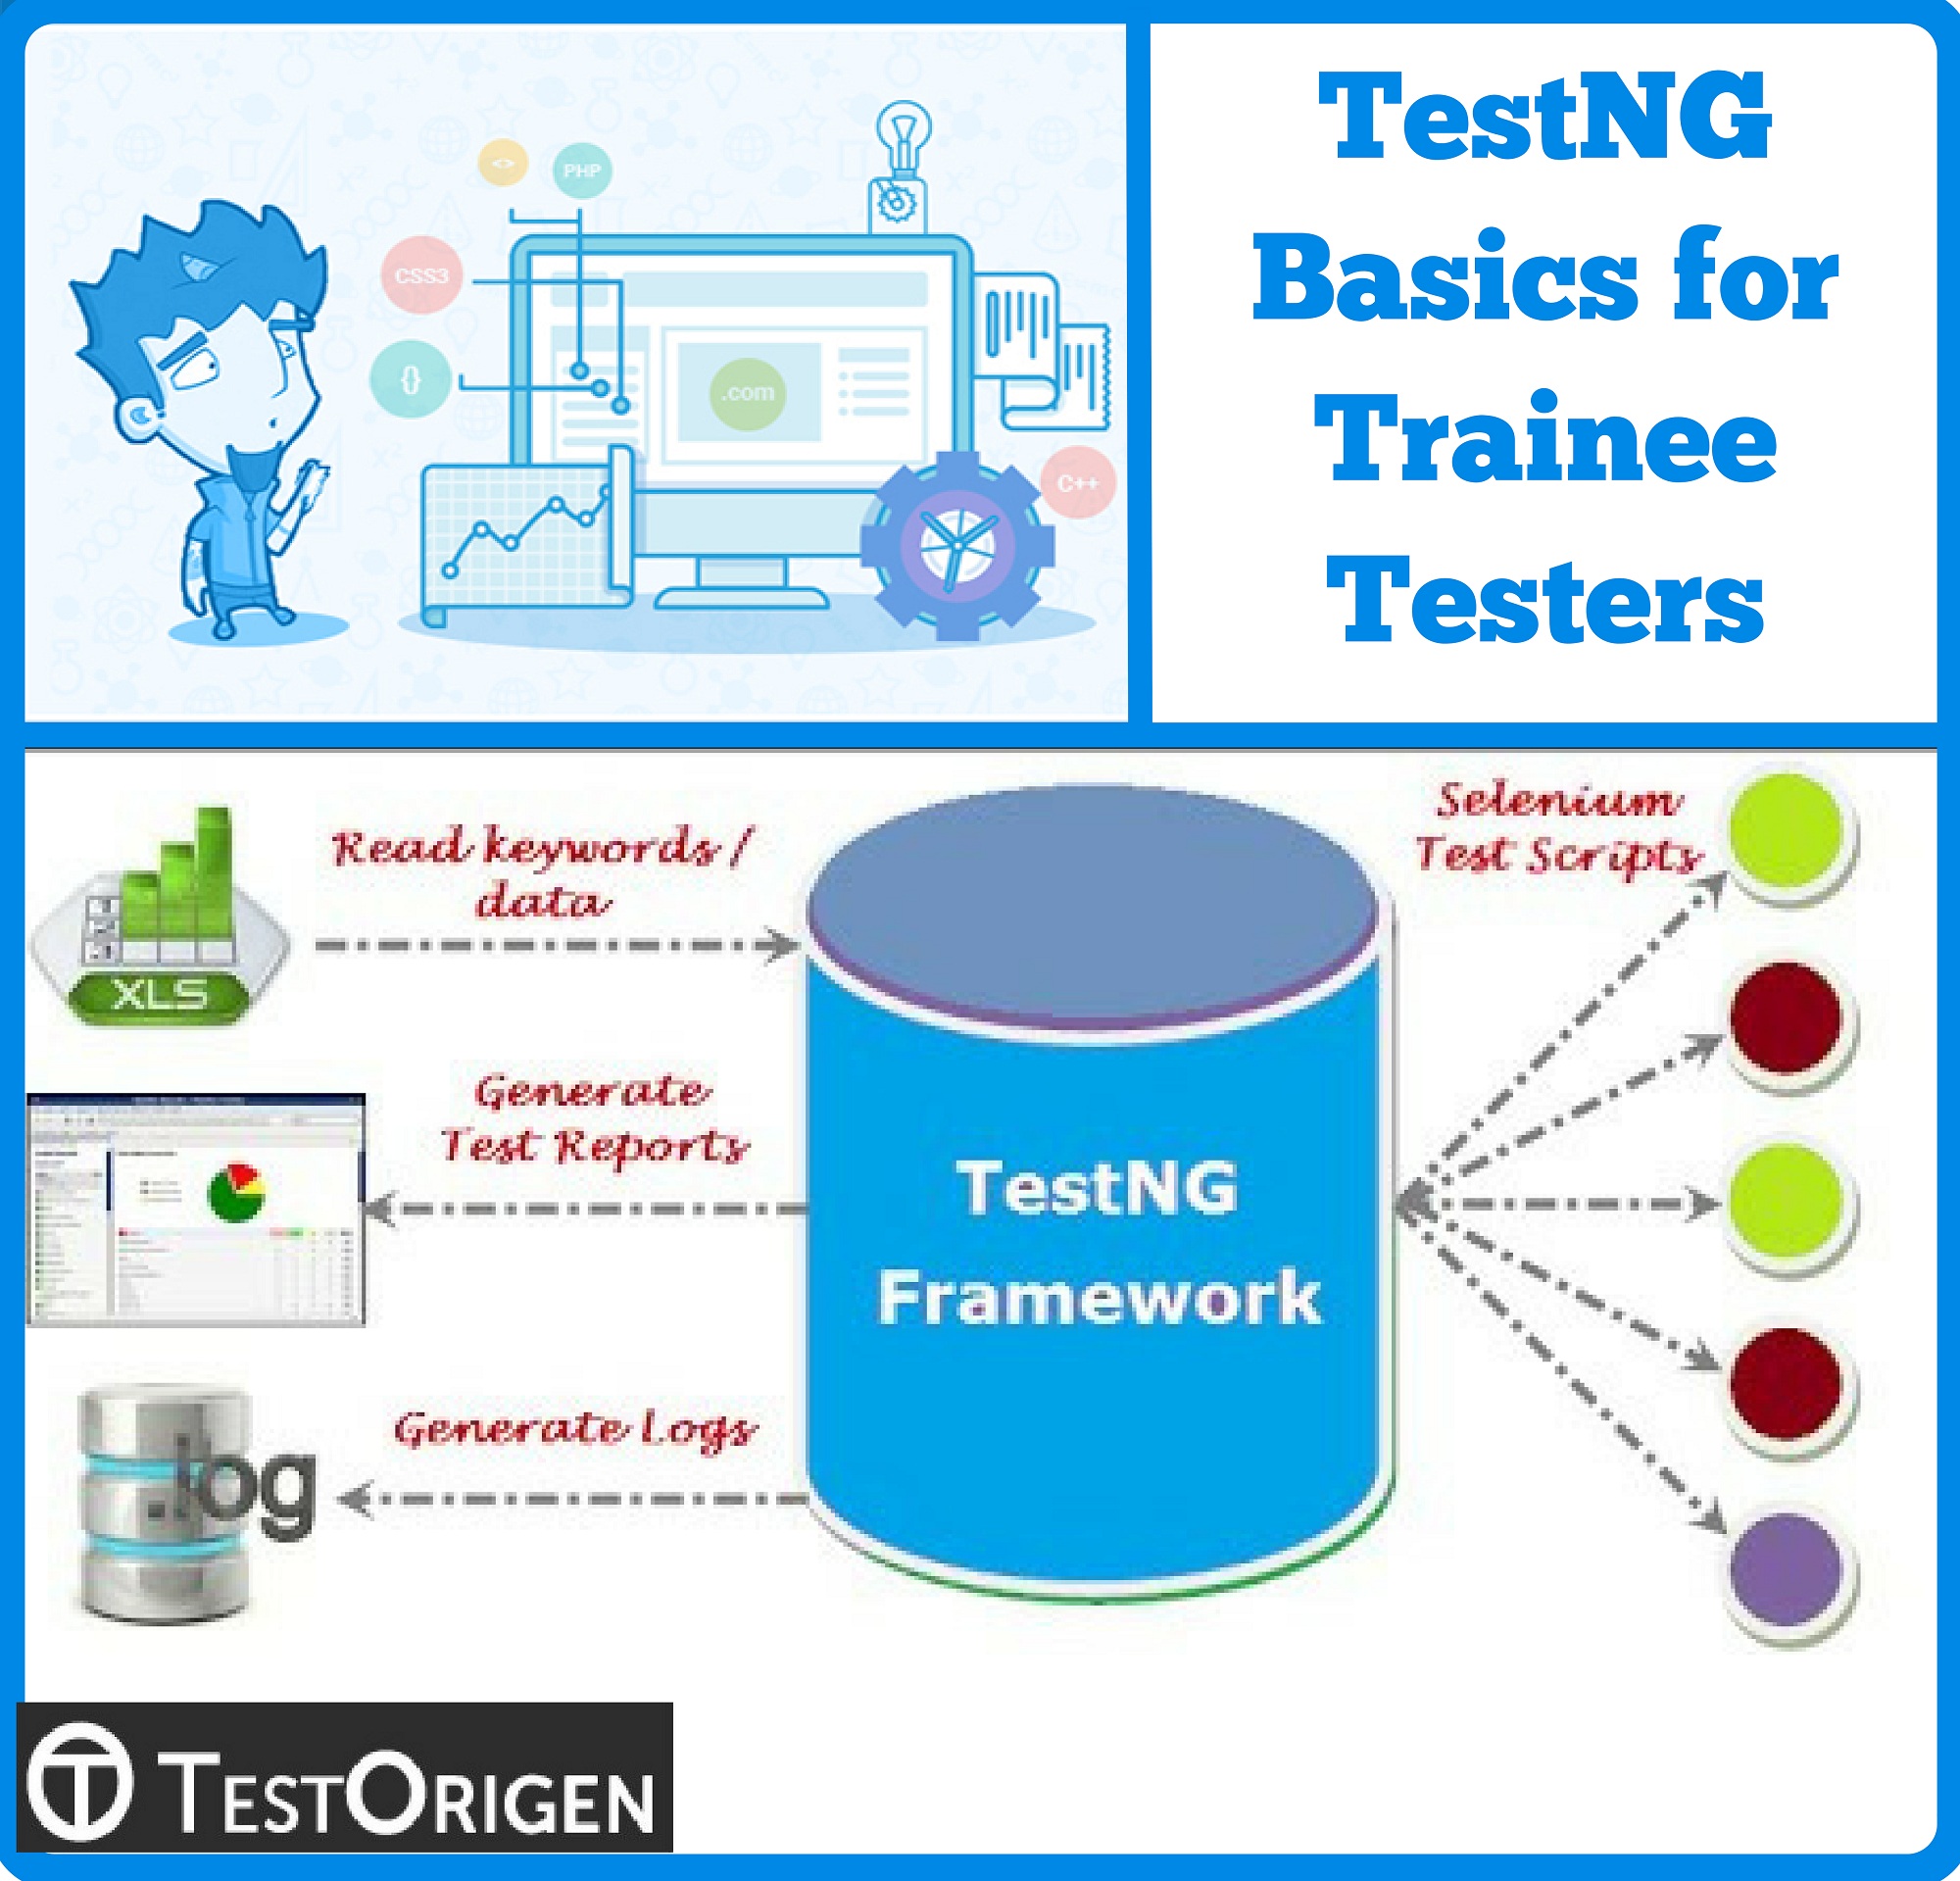 TestNG Basics for Trainee Testers